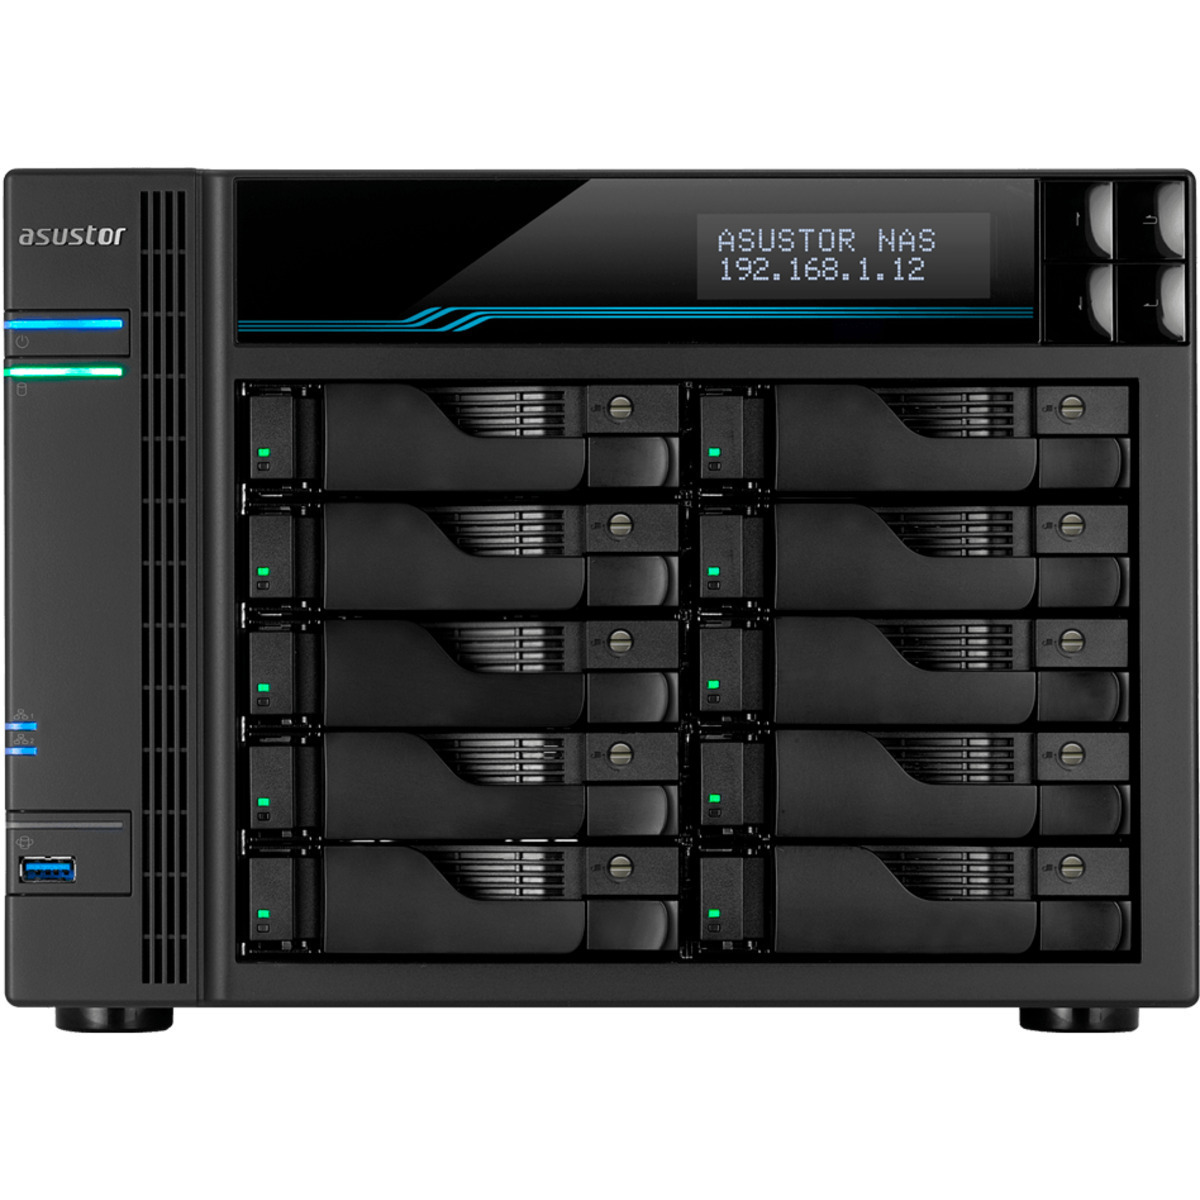 ASUSTOR AS6510T Lockerstor 10 160tb 10-Bay Desktop Multimedia / Power User / Business NAS - Network Attached Storage Device 10x16tb Seagate EXOS X18 ST16000NM000J 3.5 7200rpm SATA 6Gb/s HDD ENTERPRISE Class Drives Installed - Burn-In Tested - FREE RAM UPGRADE AS6510T Lockerstor 10